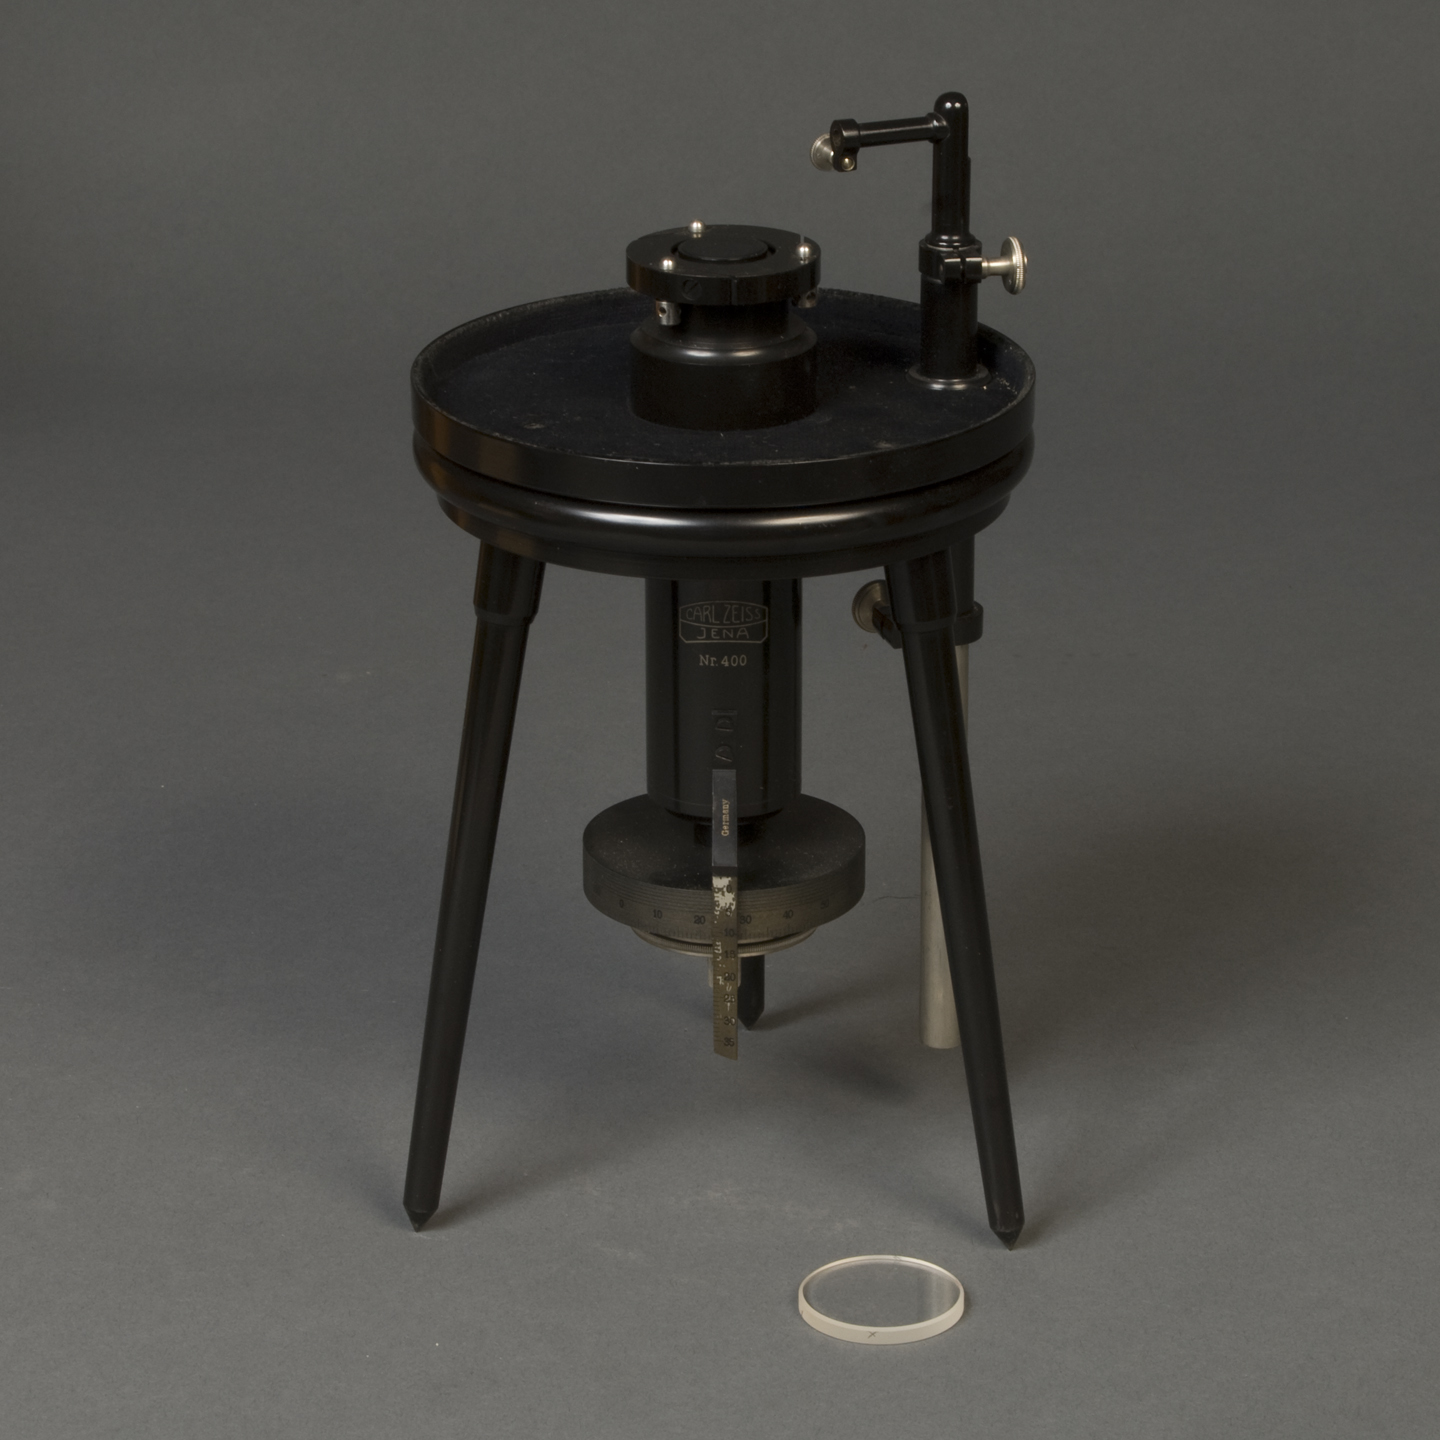 tripod device with lens. The words "Carl Zeiss, Jena, Nr. 400" appear on a cylinder that extends below the tripod's platform. Below that is a graduated dial, presumably for raising and lowering the platform. 